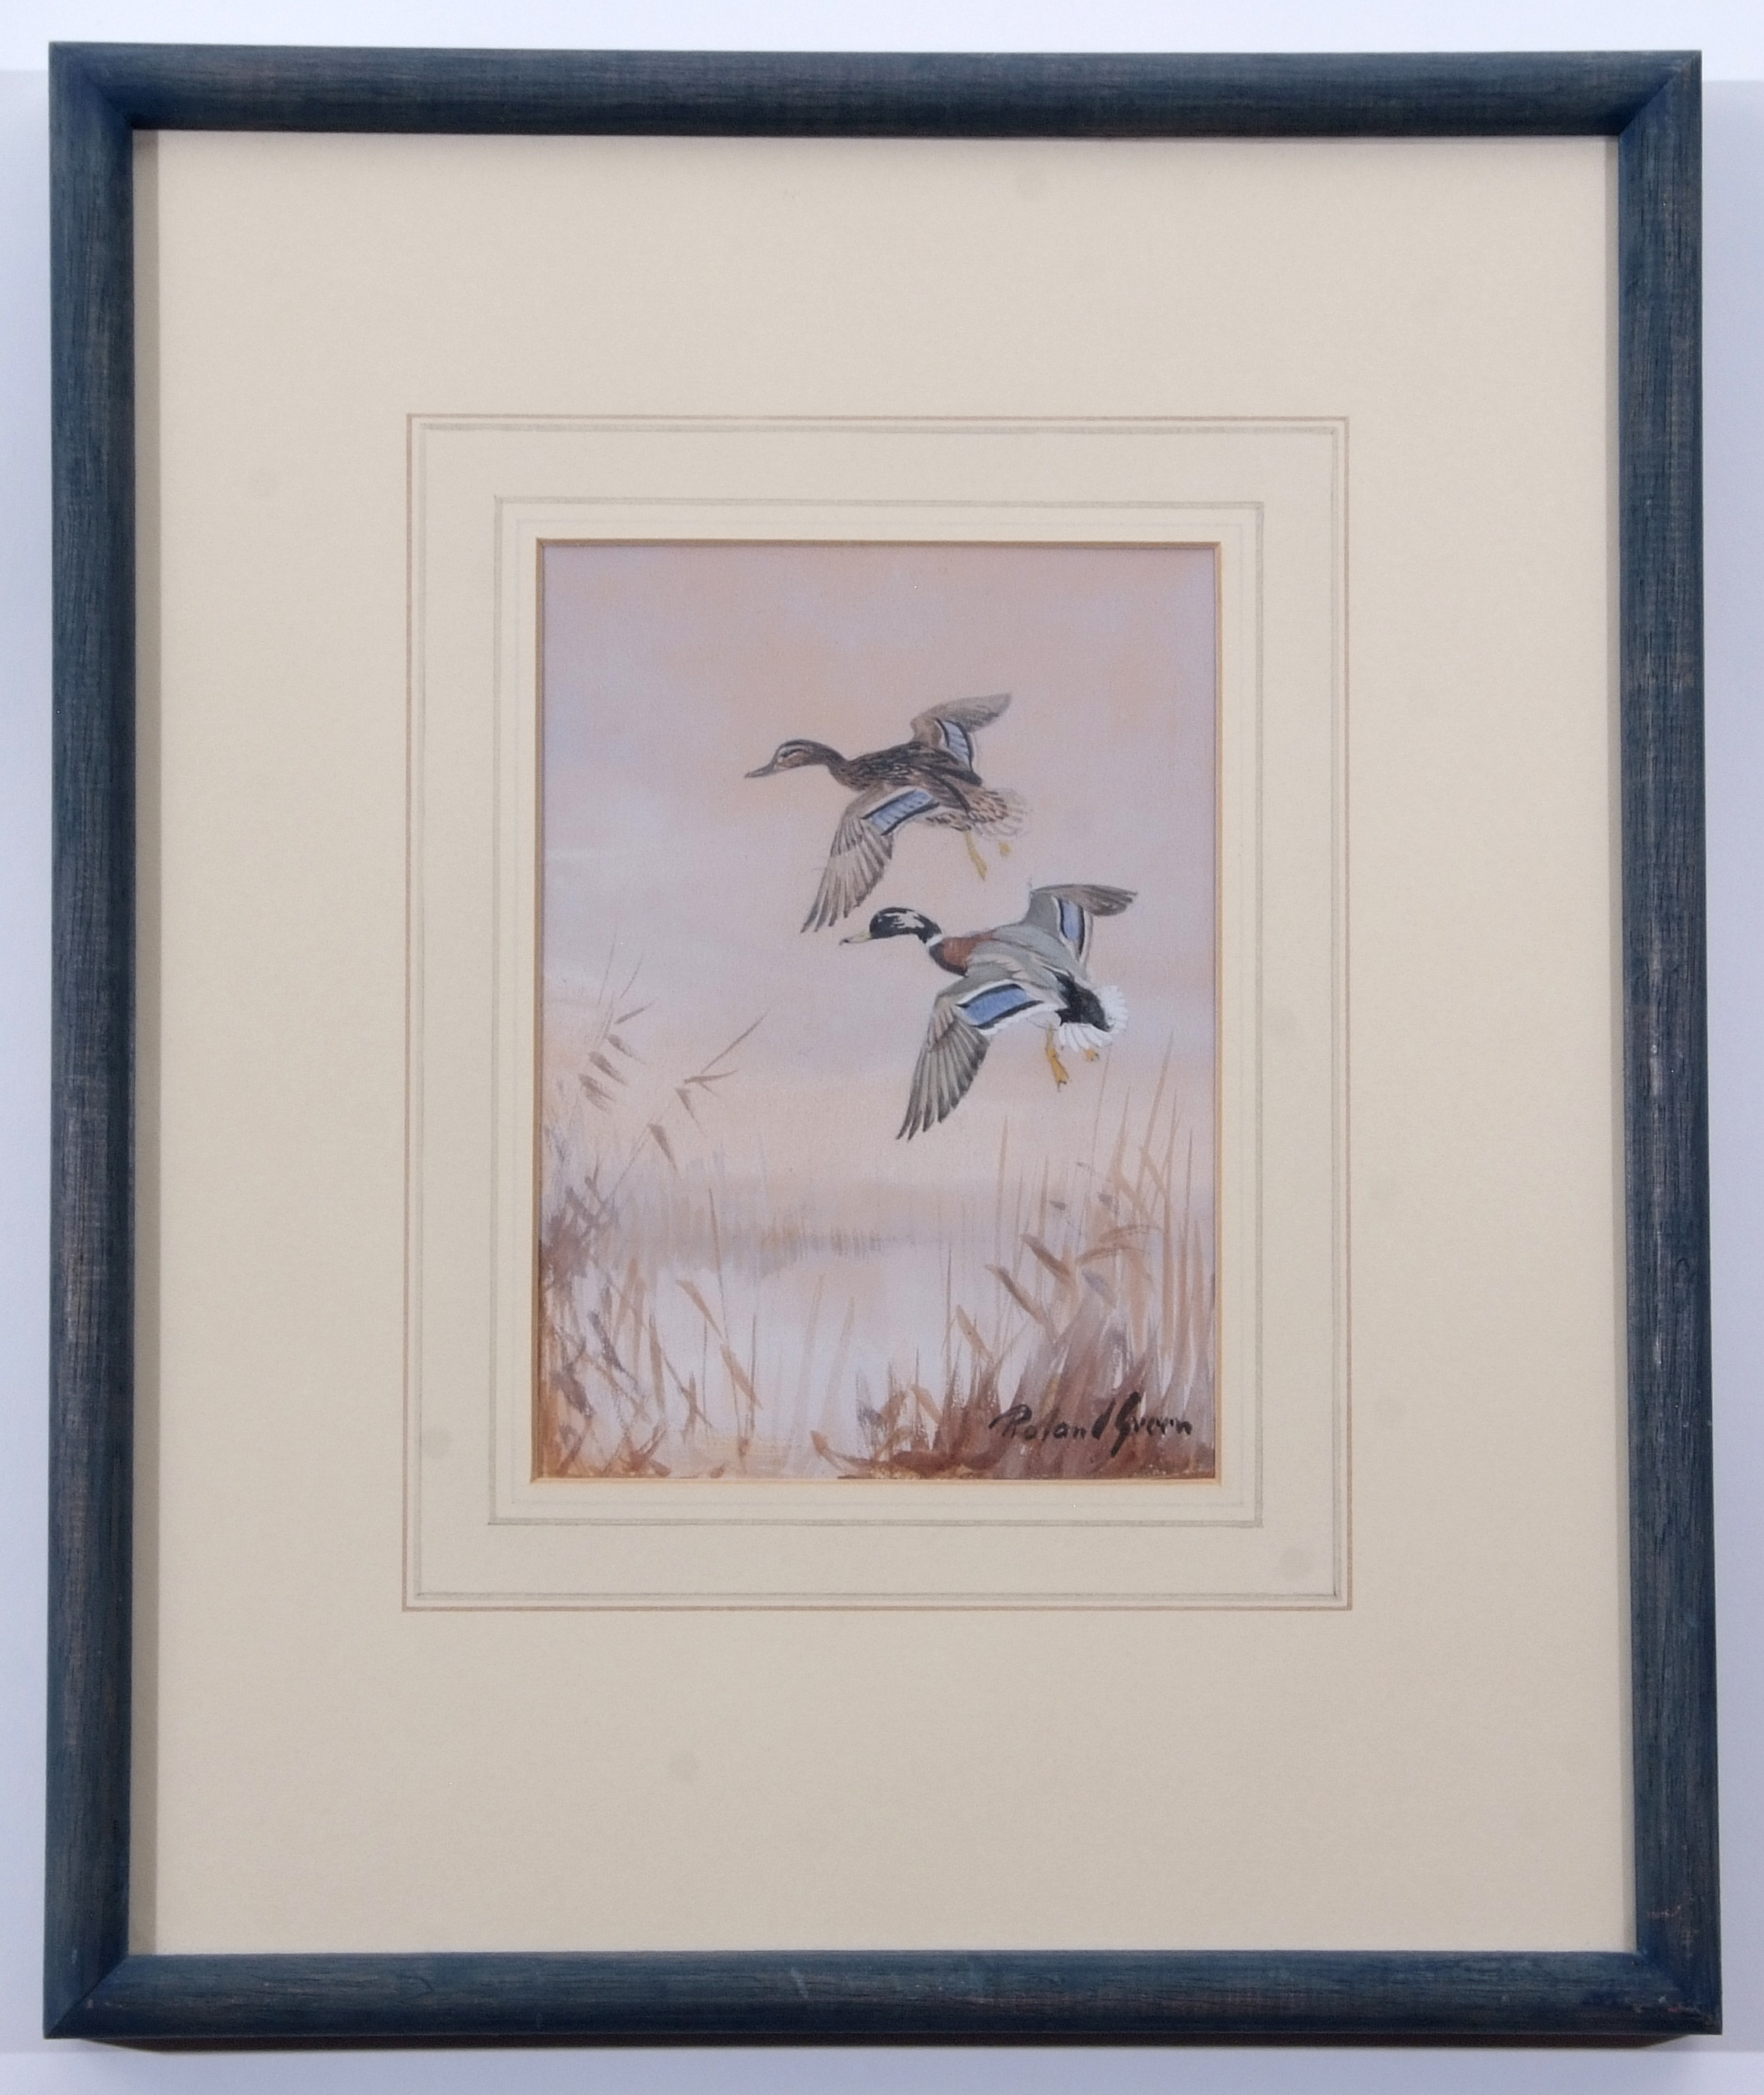 AR Roland Green (1896-1972), Mallard alighting, watercolour and gouache, signed lower right, 16 x - Image 2 of 2